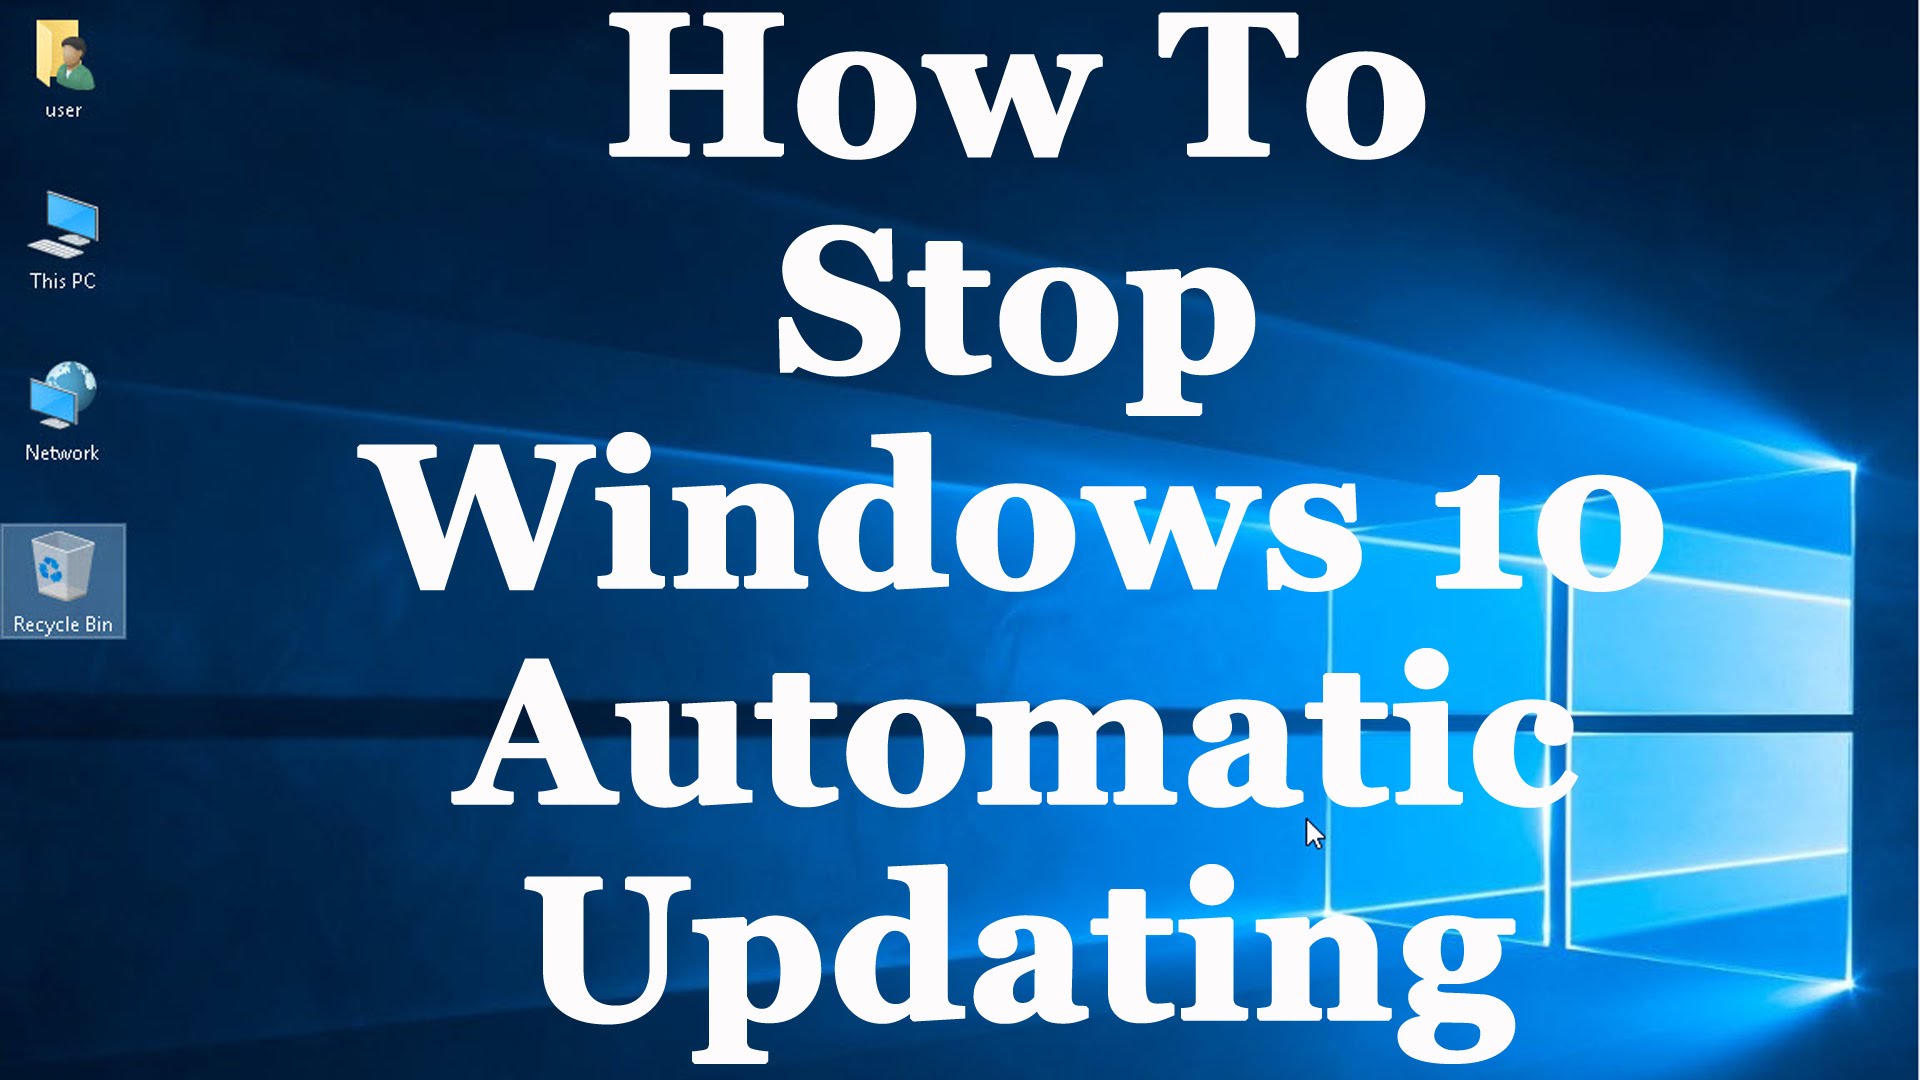 Microsoft Finally Has A Solution For The Annoying Windows Auto-Update